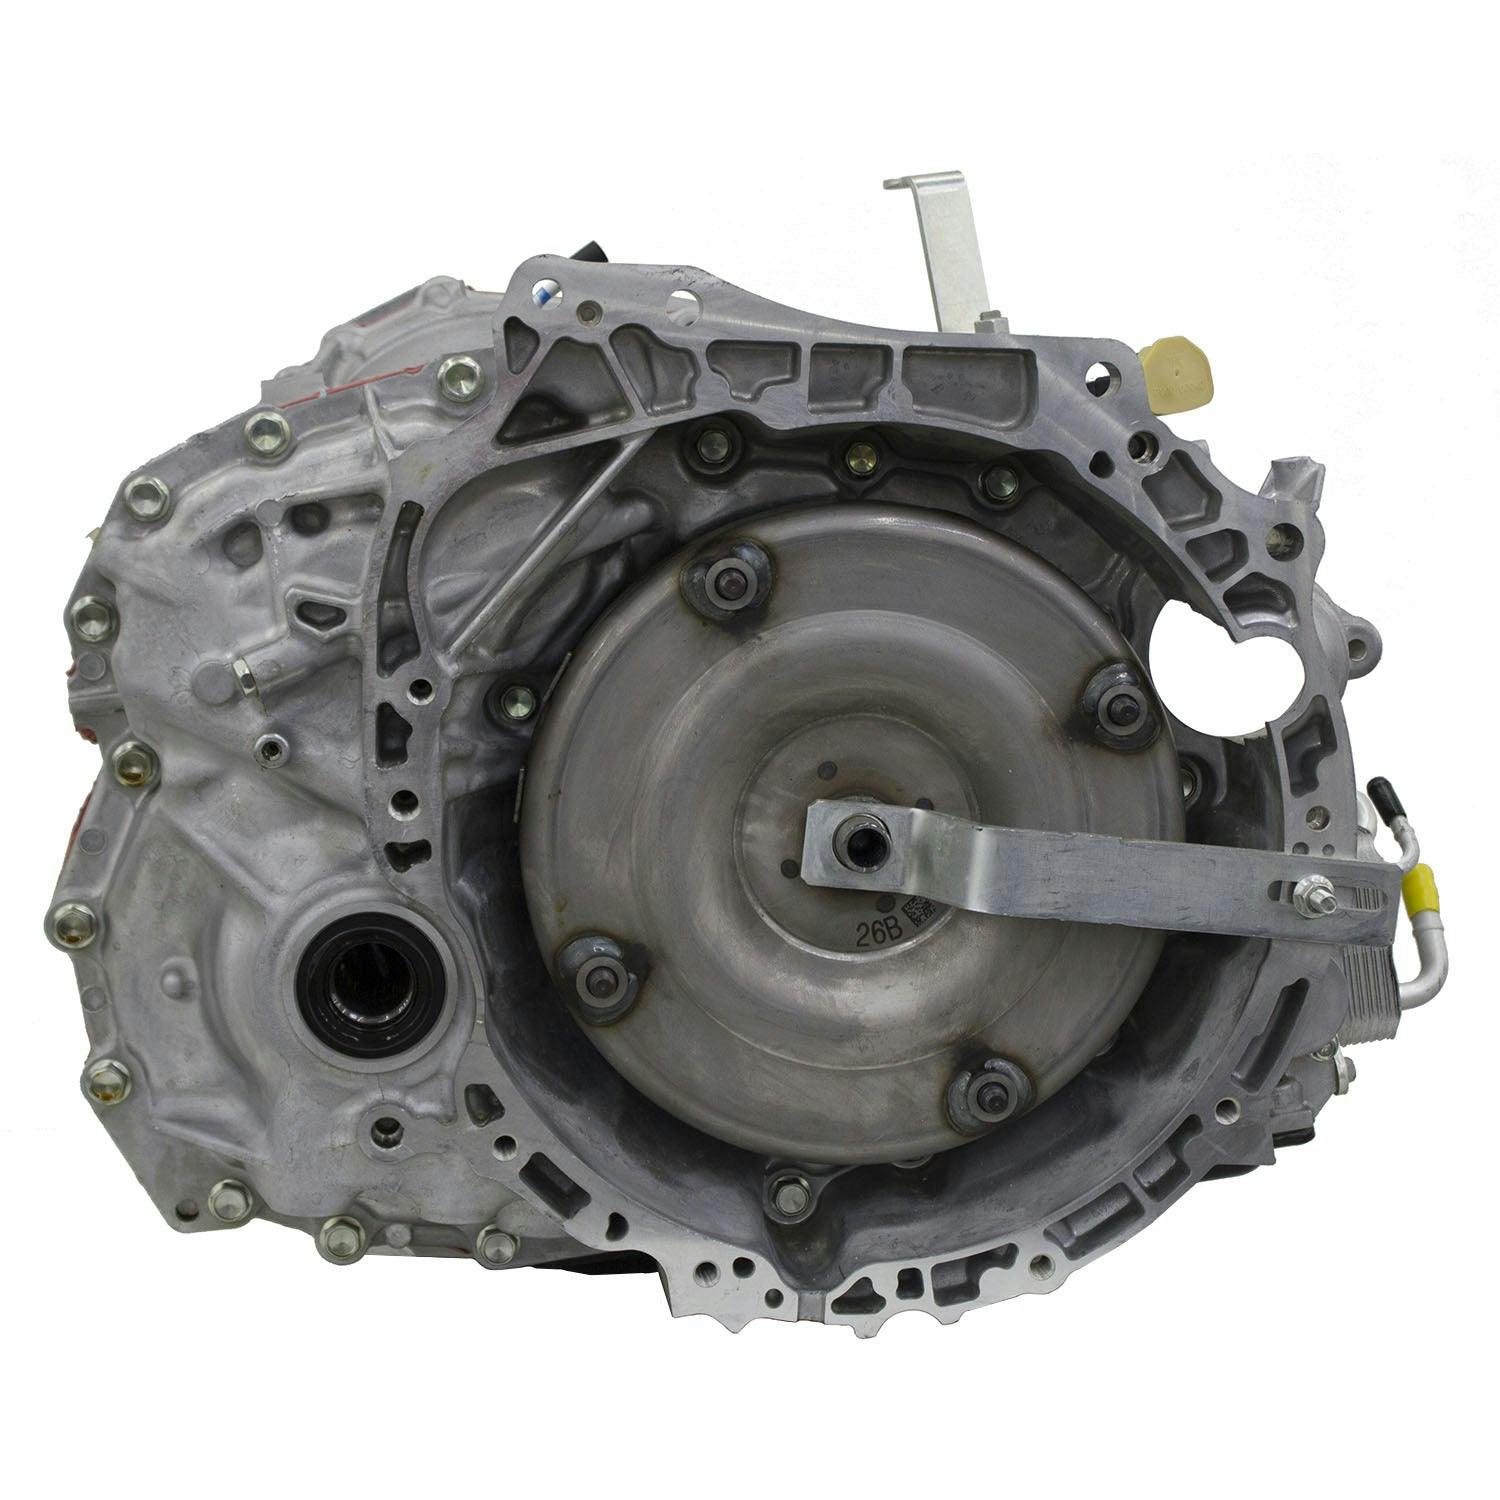 Automatic Transmission for 2010-2013 Nissan Altima FWD with 2.5L Inline-4 Engine